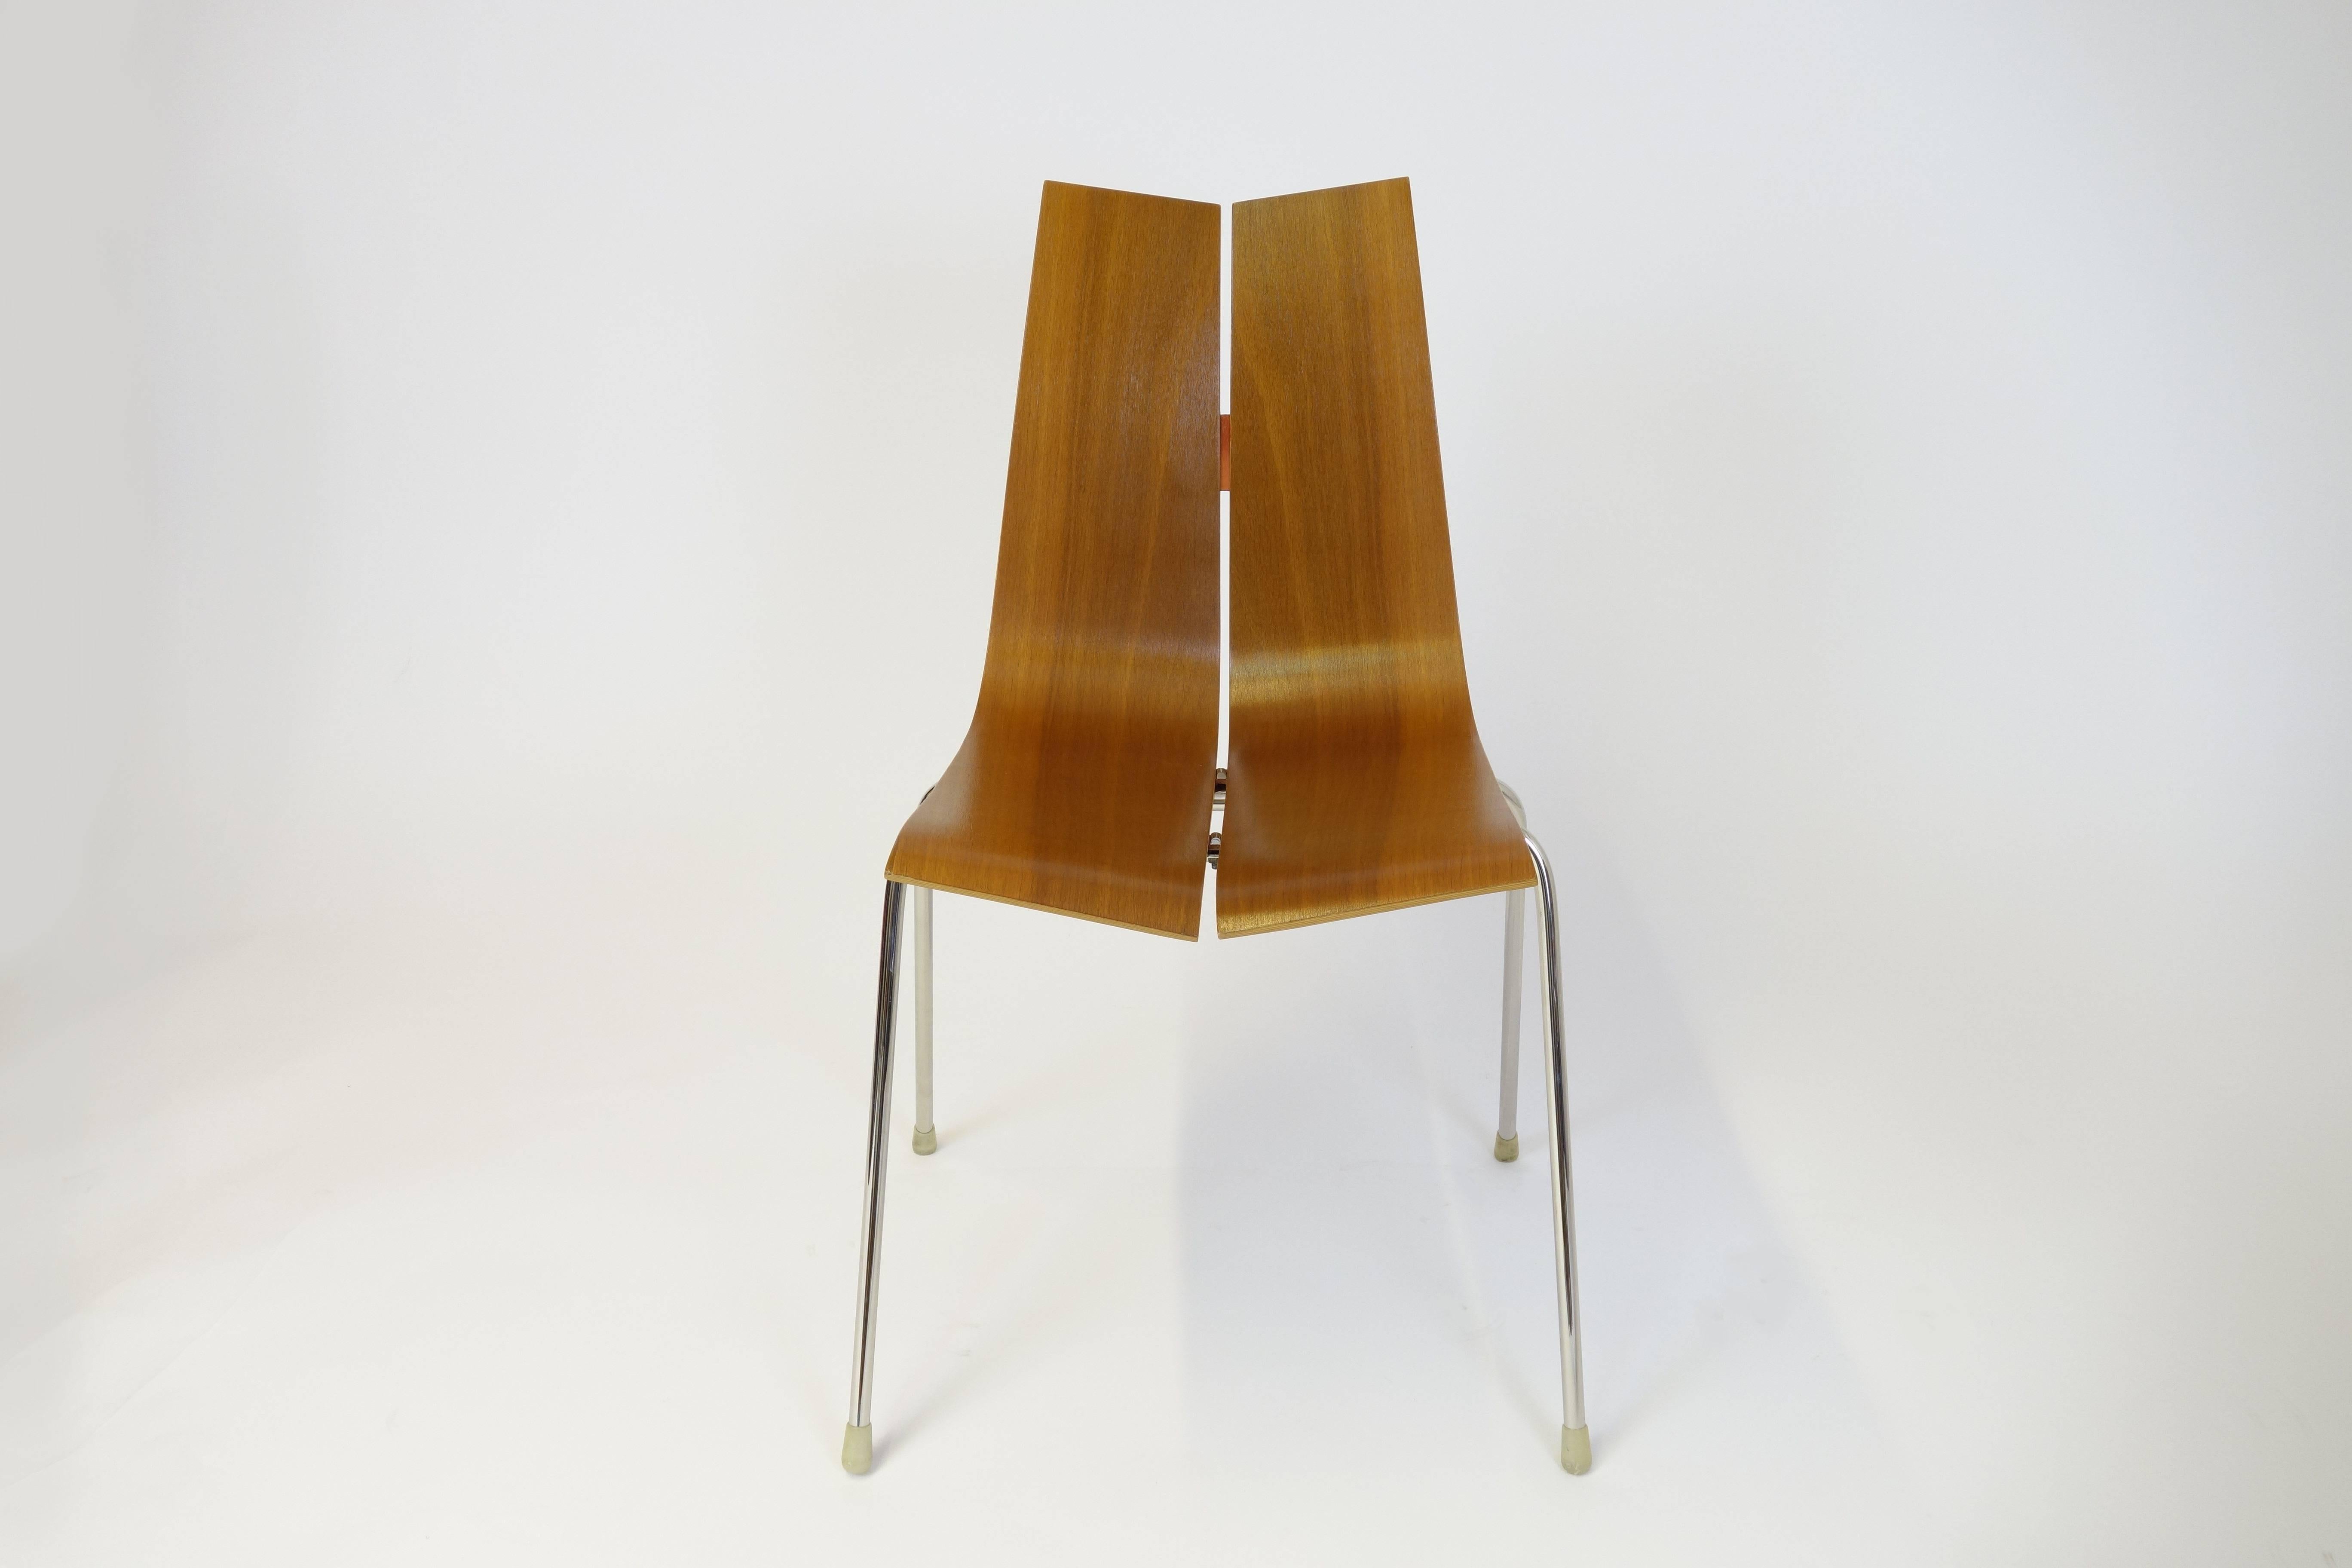 Swiss Stacking Chairs Designed by Hans Bellmann, Horgen-Glarus Seat Stool, 1952 For Sale